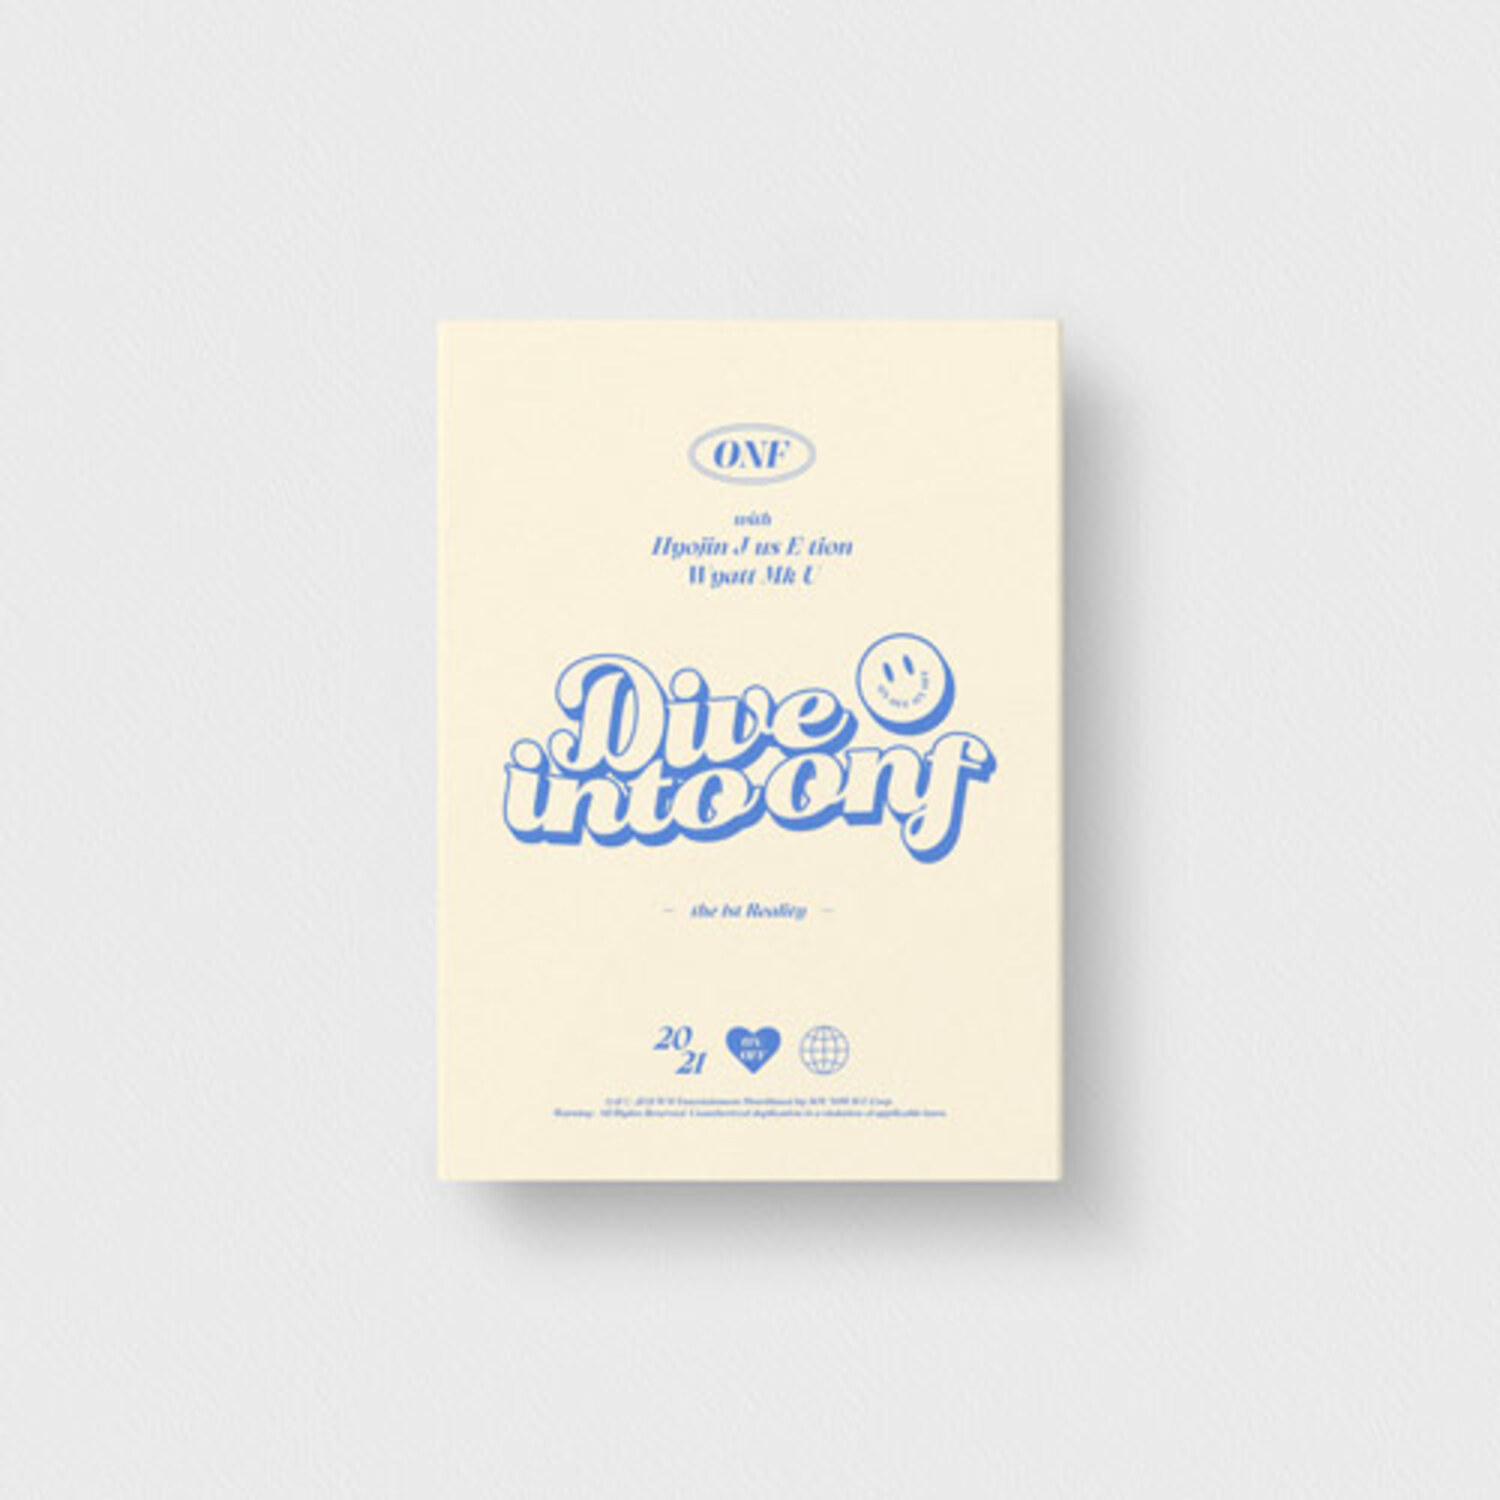 ONF(온앤오프) THE 1ST REALITY [Dive into ONF] DVD